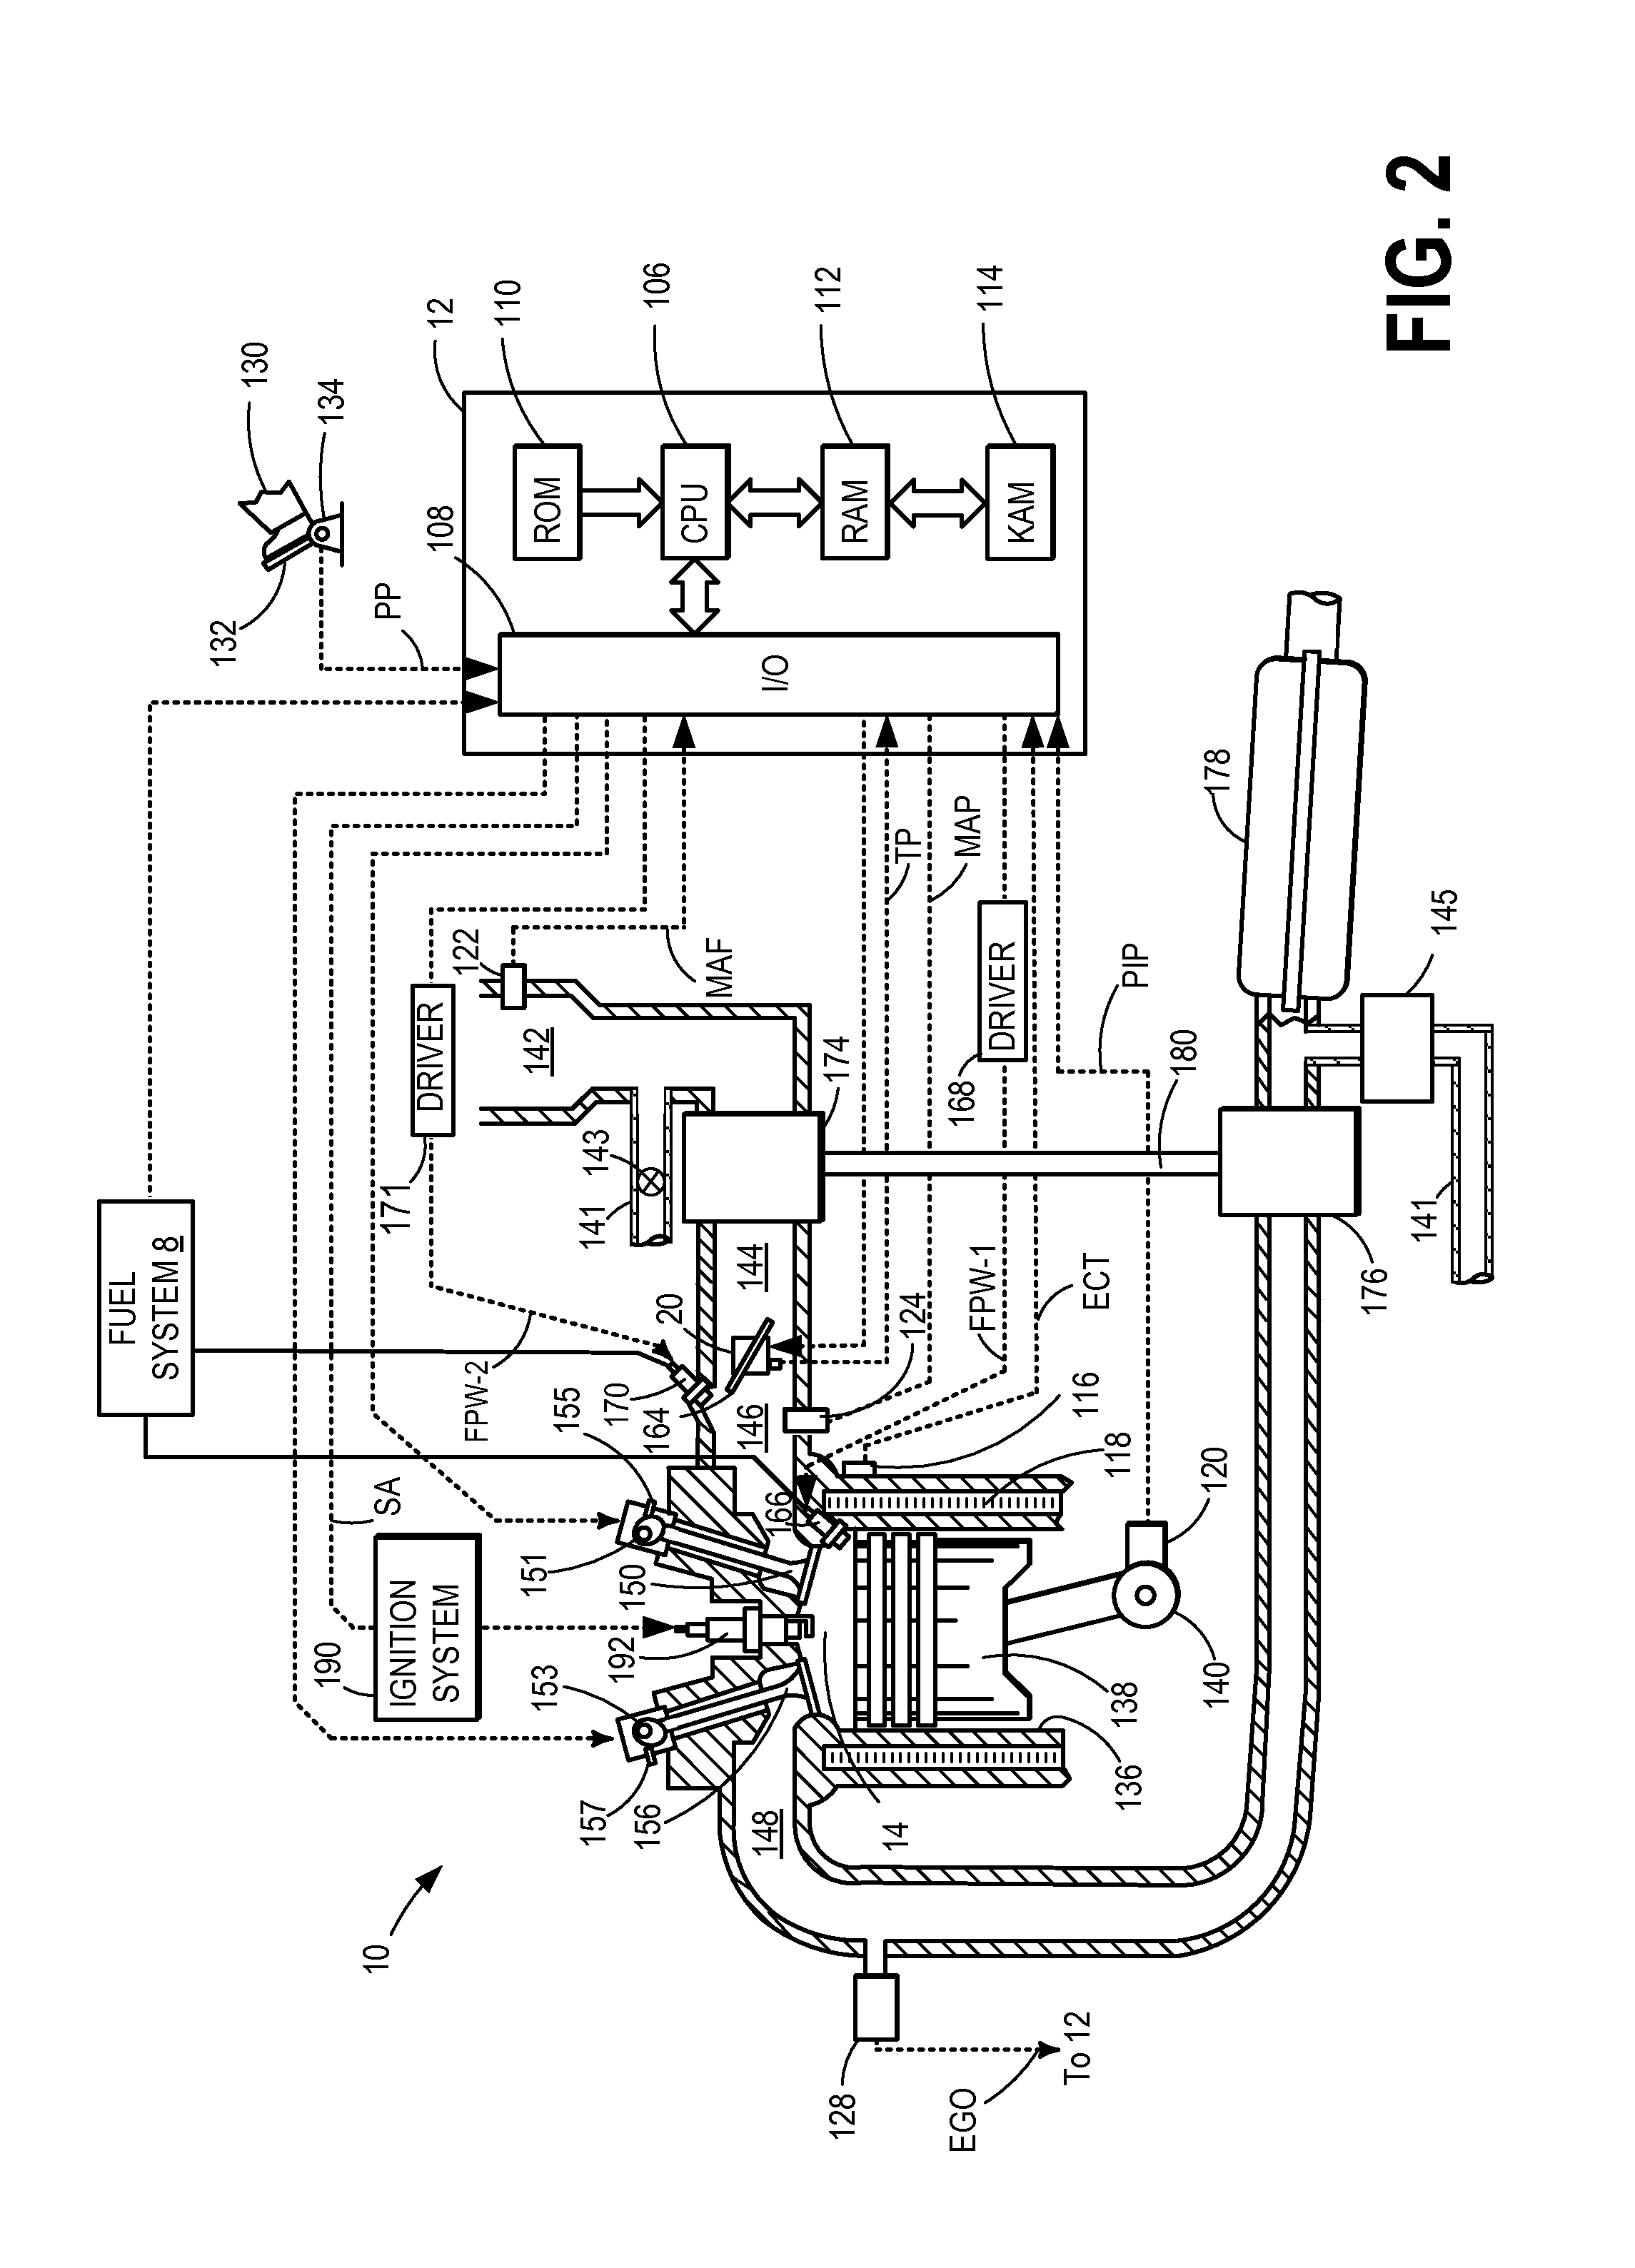 Method and system for exhaust catalyst warming